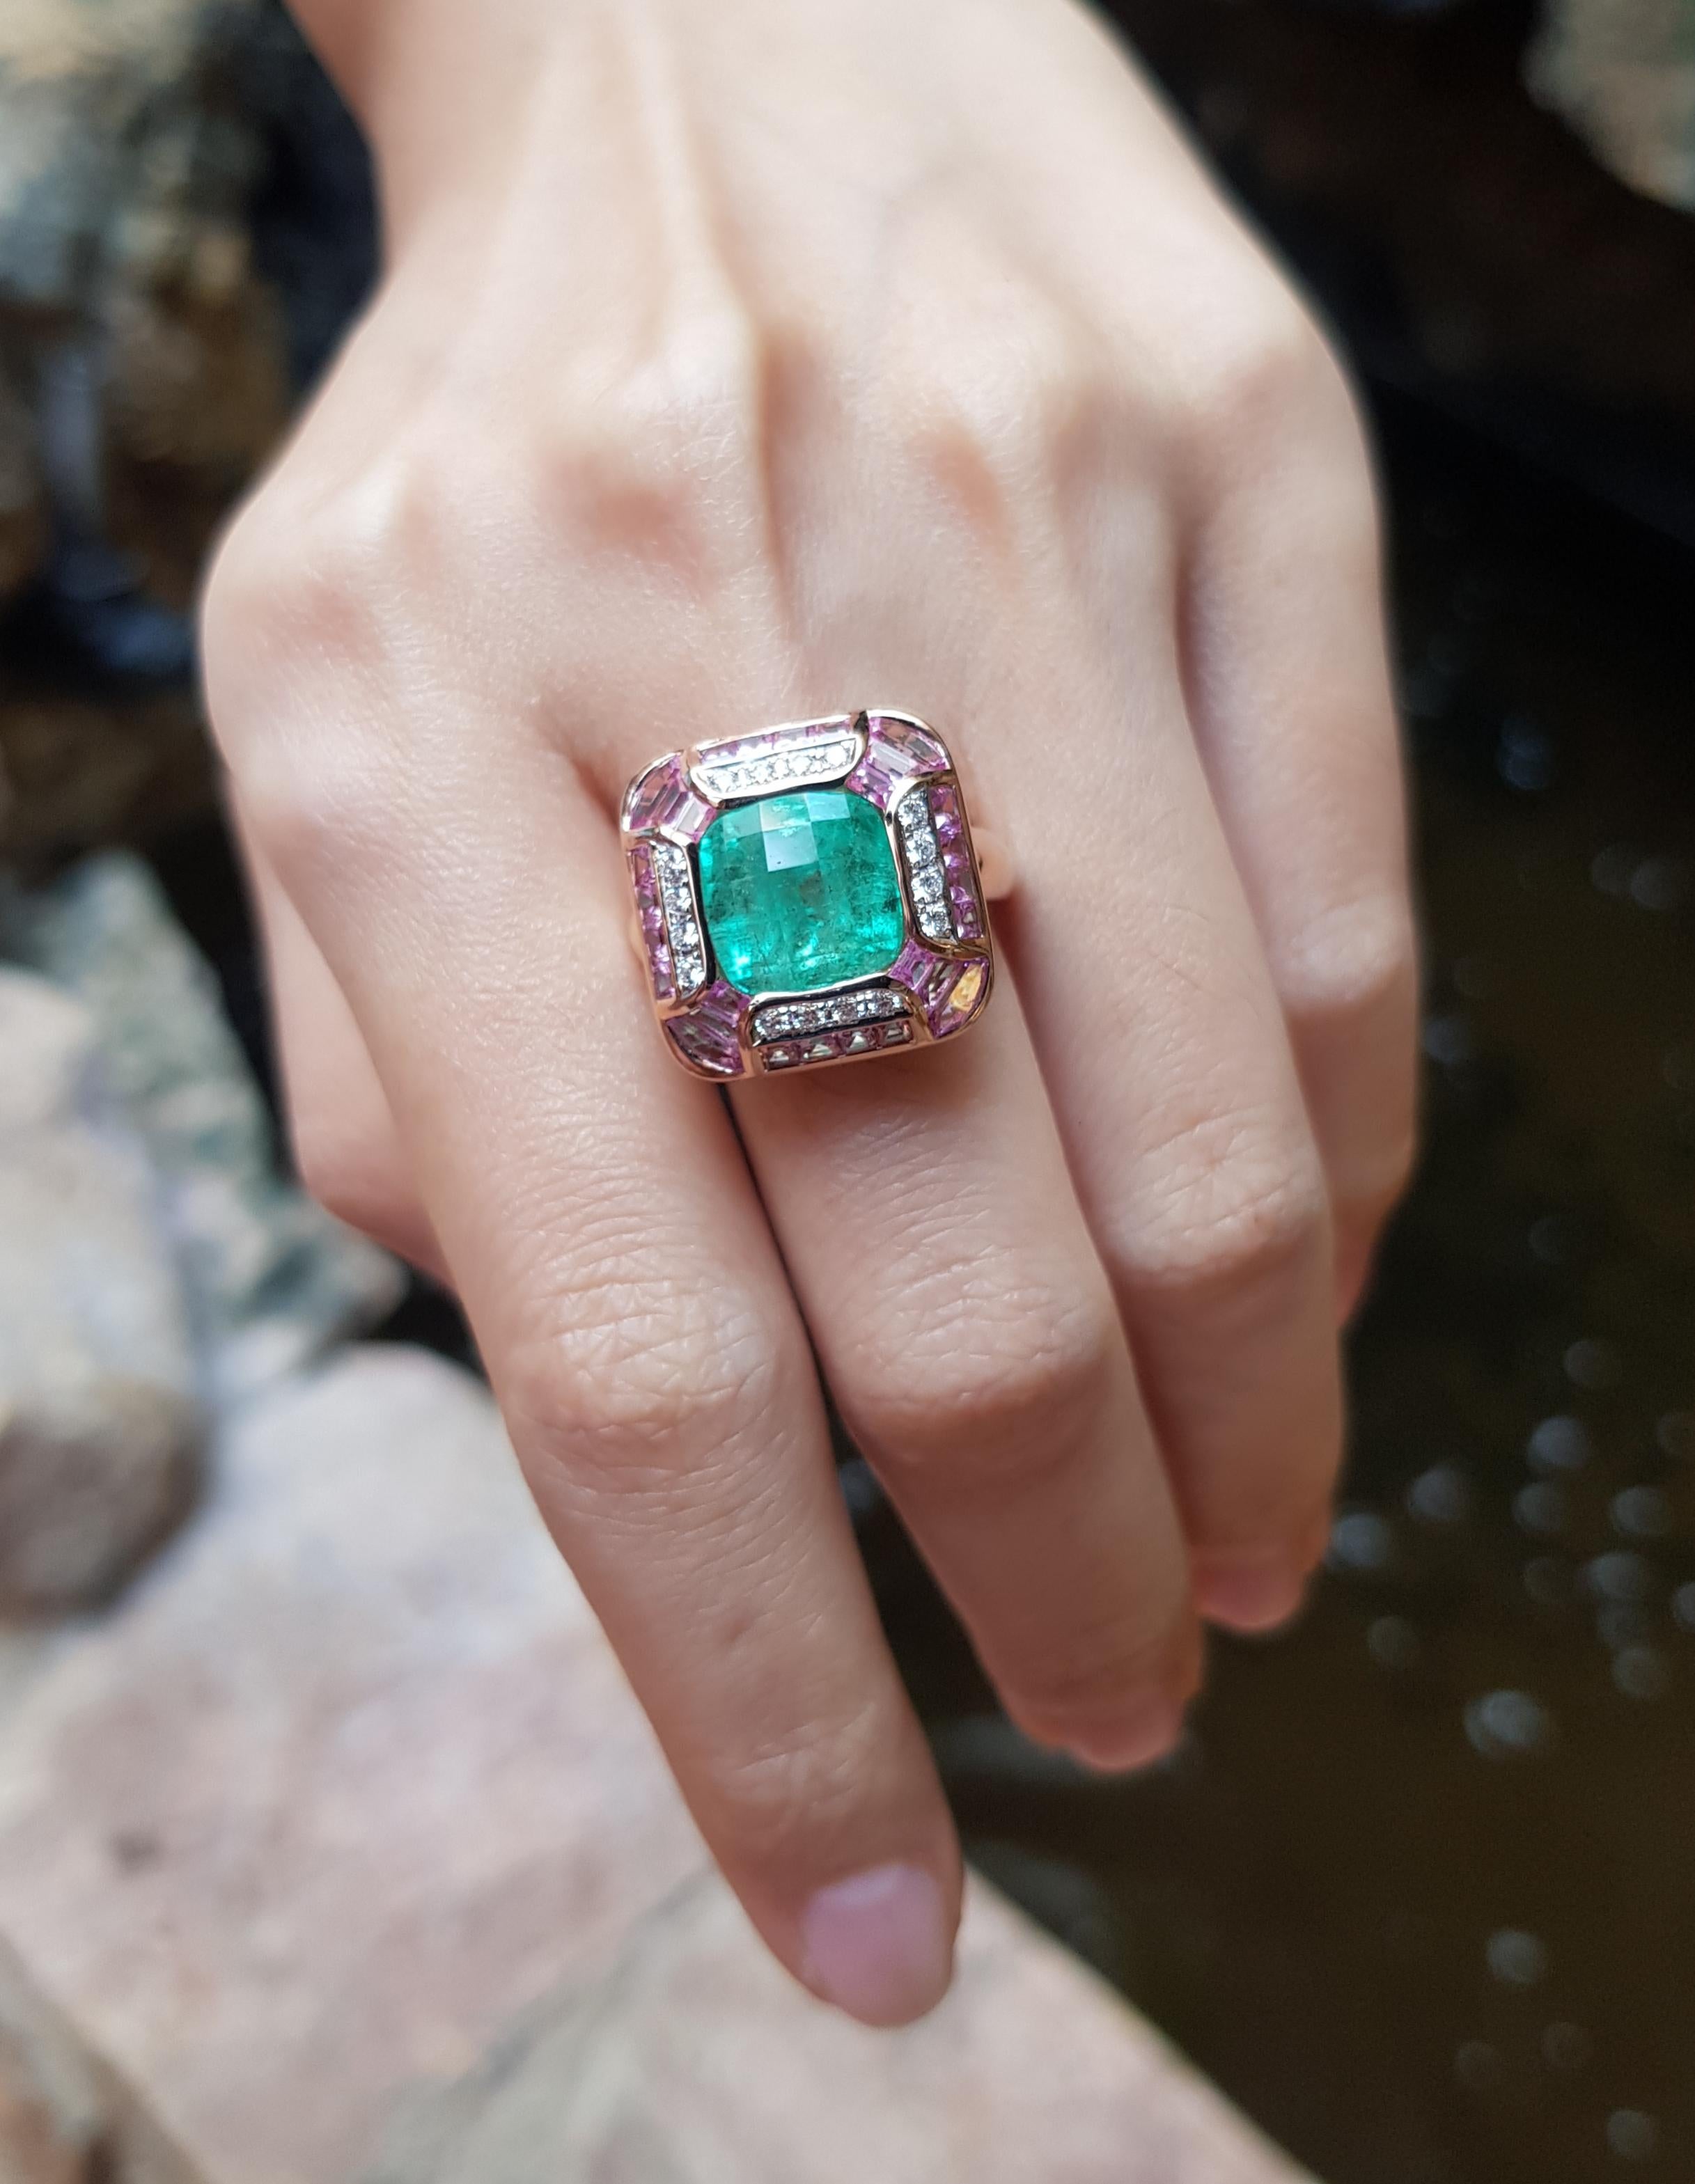 Emerald 5.52 carats with Pink Sapphire 2.84 carats and Diamond 0.25 carat Ring set 18 Karat Rose Gold Settings

Width:  1.9 cm 
Length: 1.9 cm
Ring Size: 53
Total Weight: 12.91 grams

